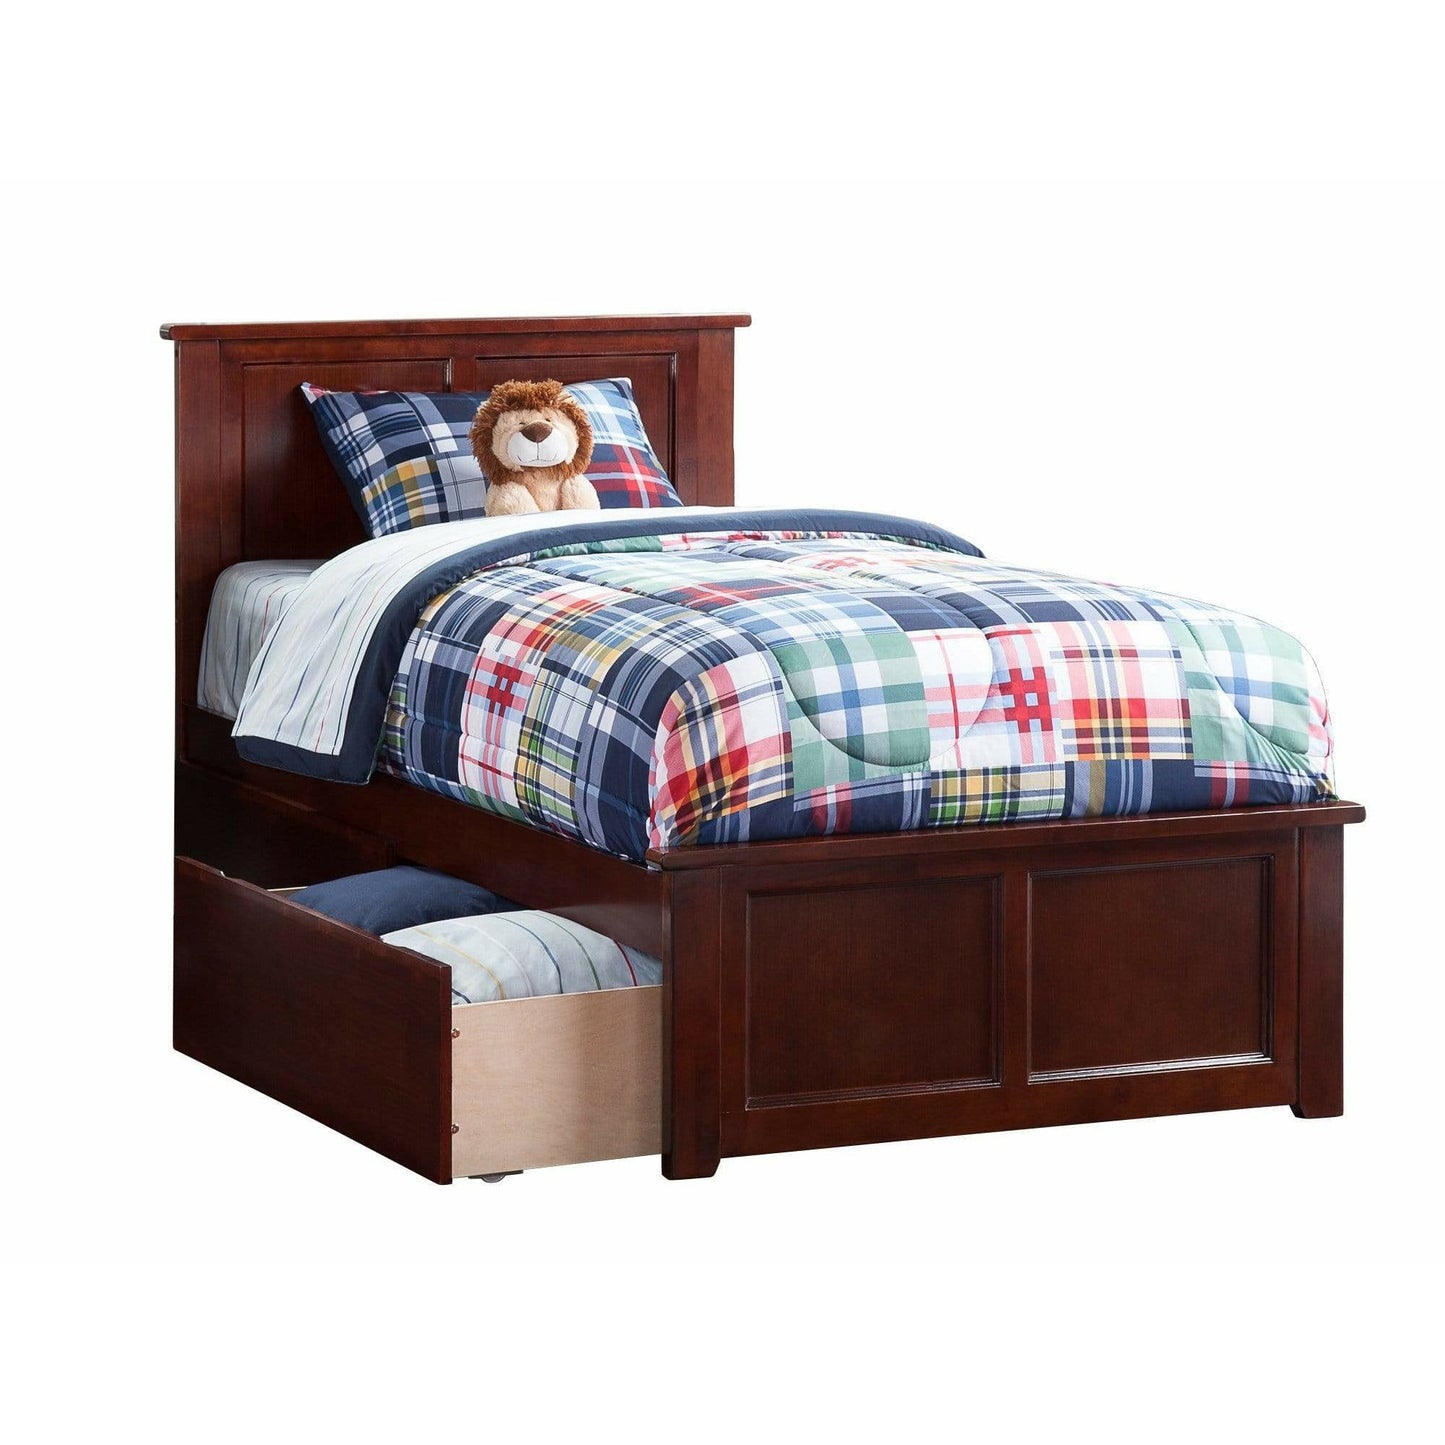 Atlantic Furniture Bed Walnut Madison Twin Platform Bed with Matching Foot Board with 2 Urban Bed Drawers in Espresso